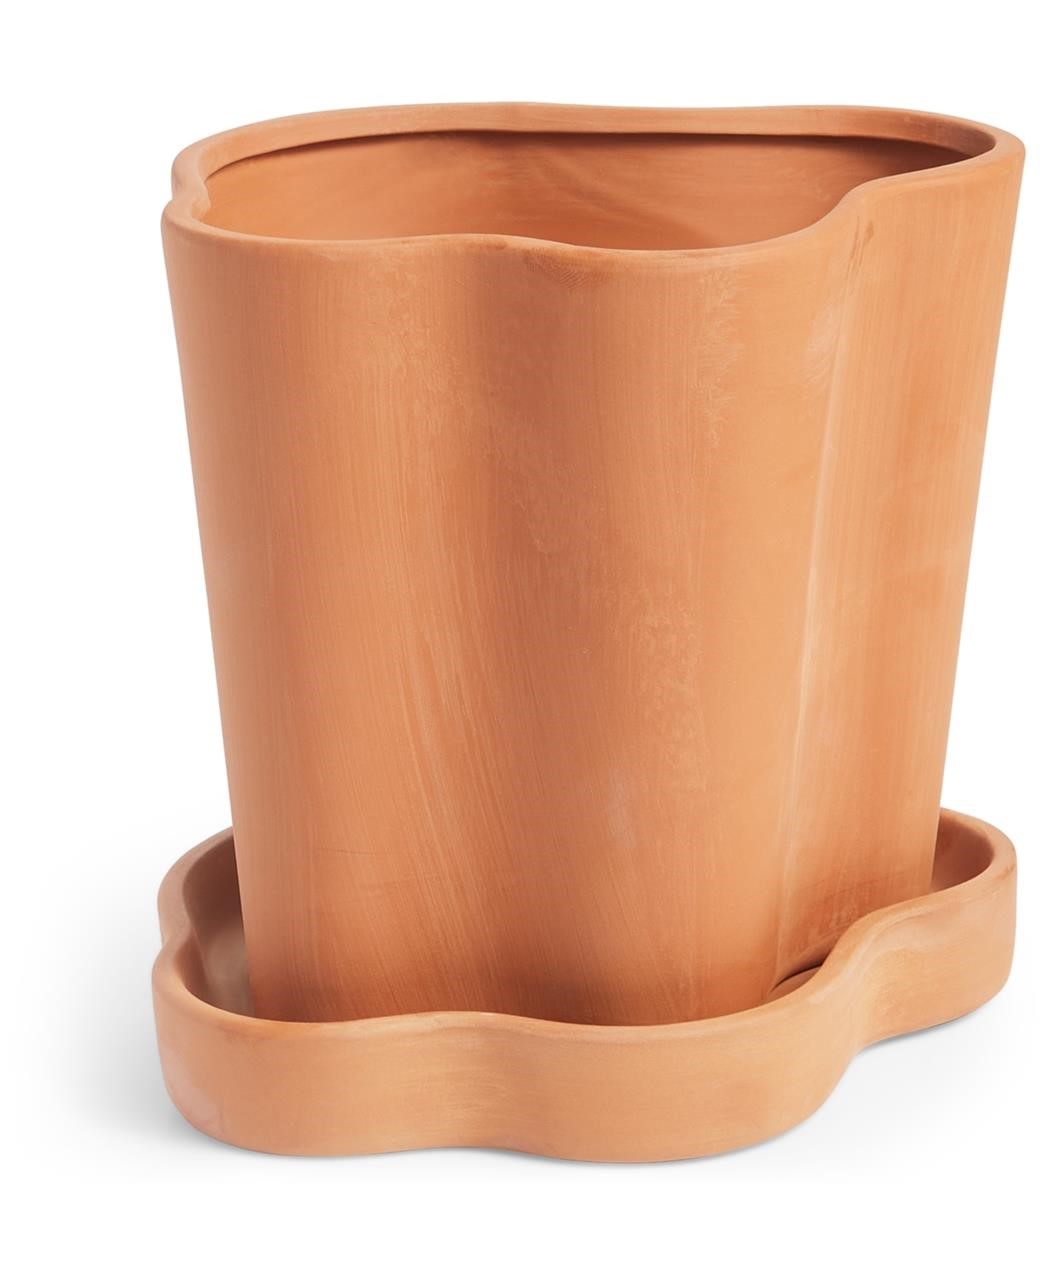 Terra-cotta planter with tray